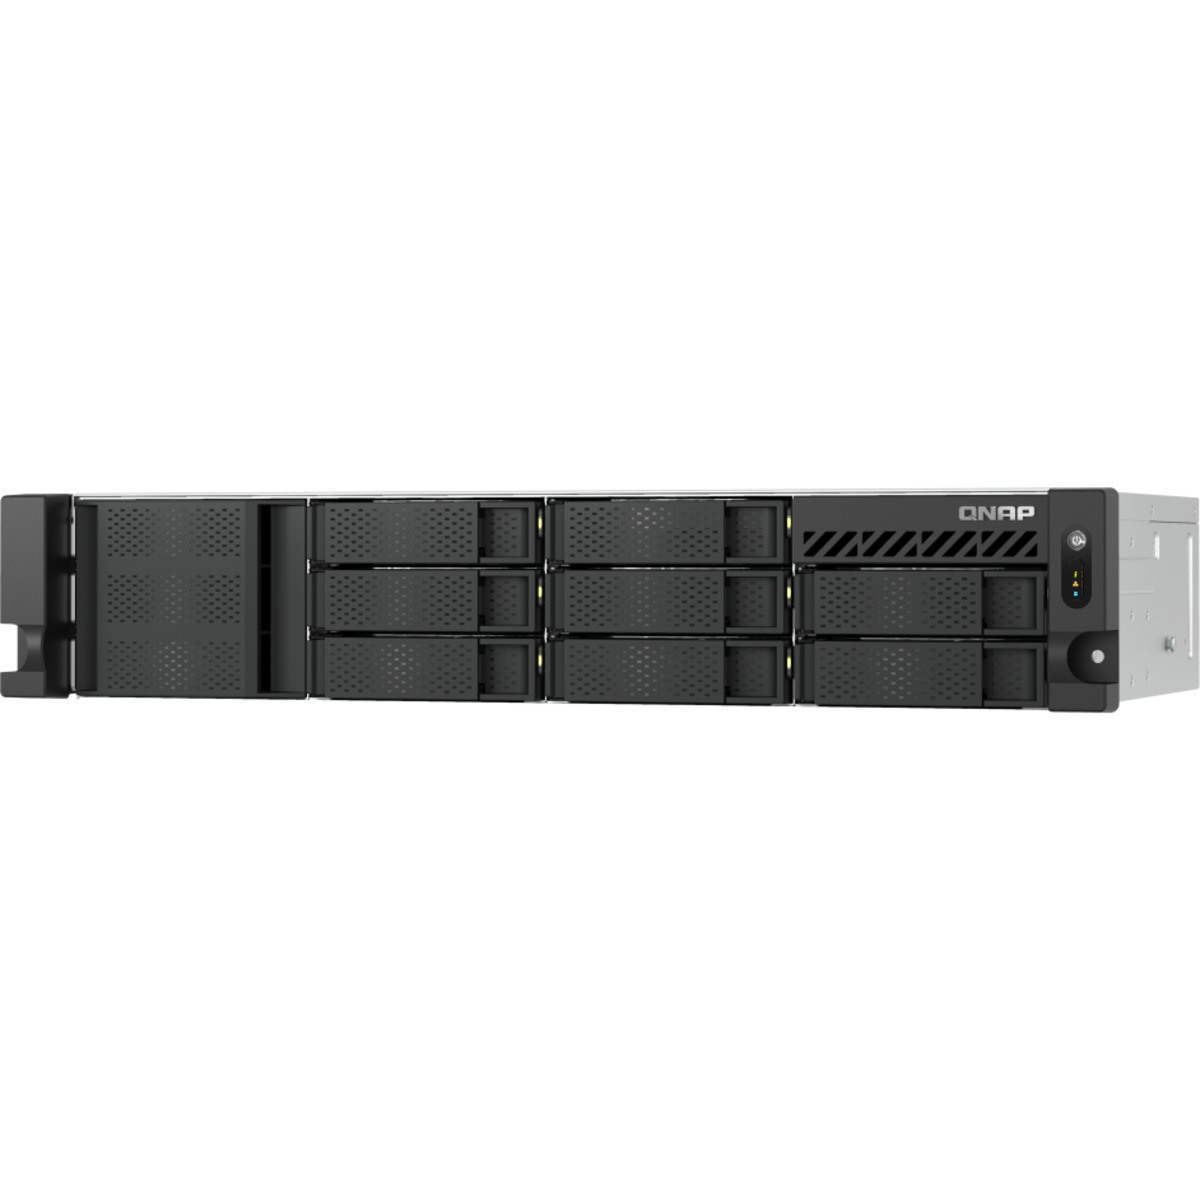 QNAP TS-855eU-RP 48tb 8-Bay RackMount Multimedia / Power User / Business NAS - Network Attached Storage Device 6x8tb Western Digital Red Pro WD8005FFBX 3.5 7200rpm SATA 6Gb/s HDD NAS Class Drives Installed - Burn-In Tested - FREE RAM UPGRADE TS-855eU-RP